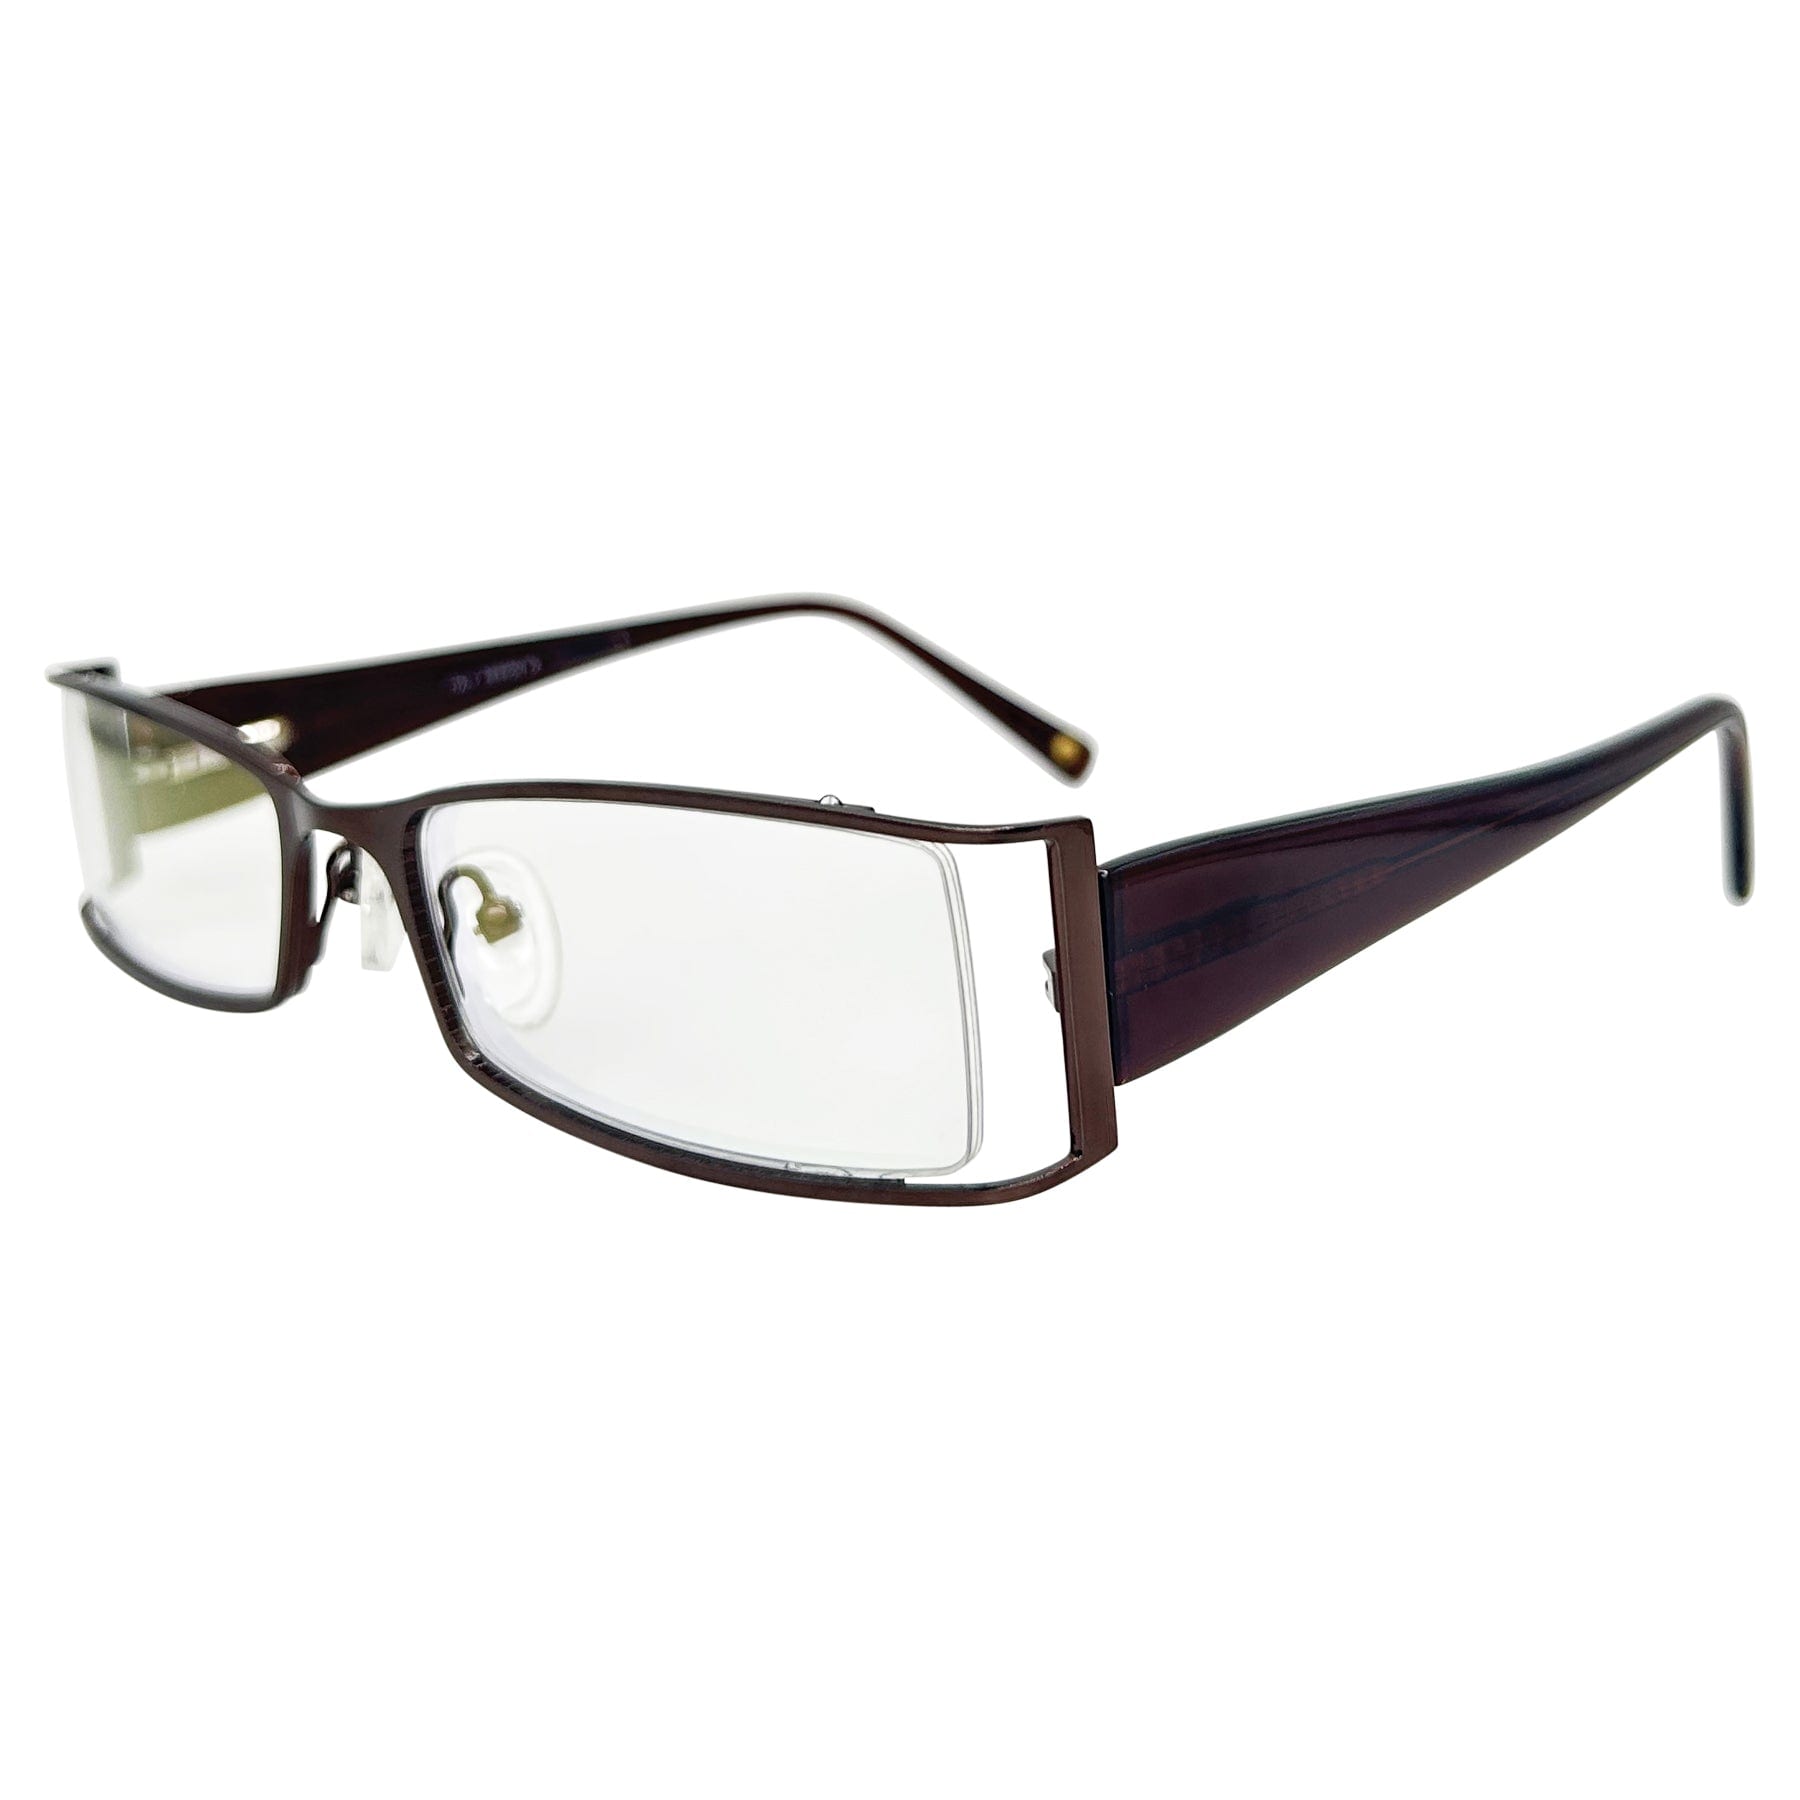 90s copper retro glasses with a rectangular bayonetta style frame